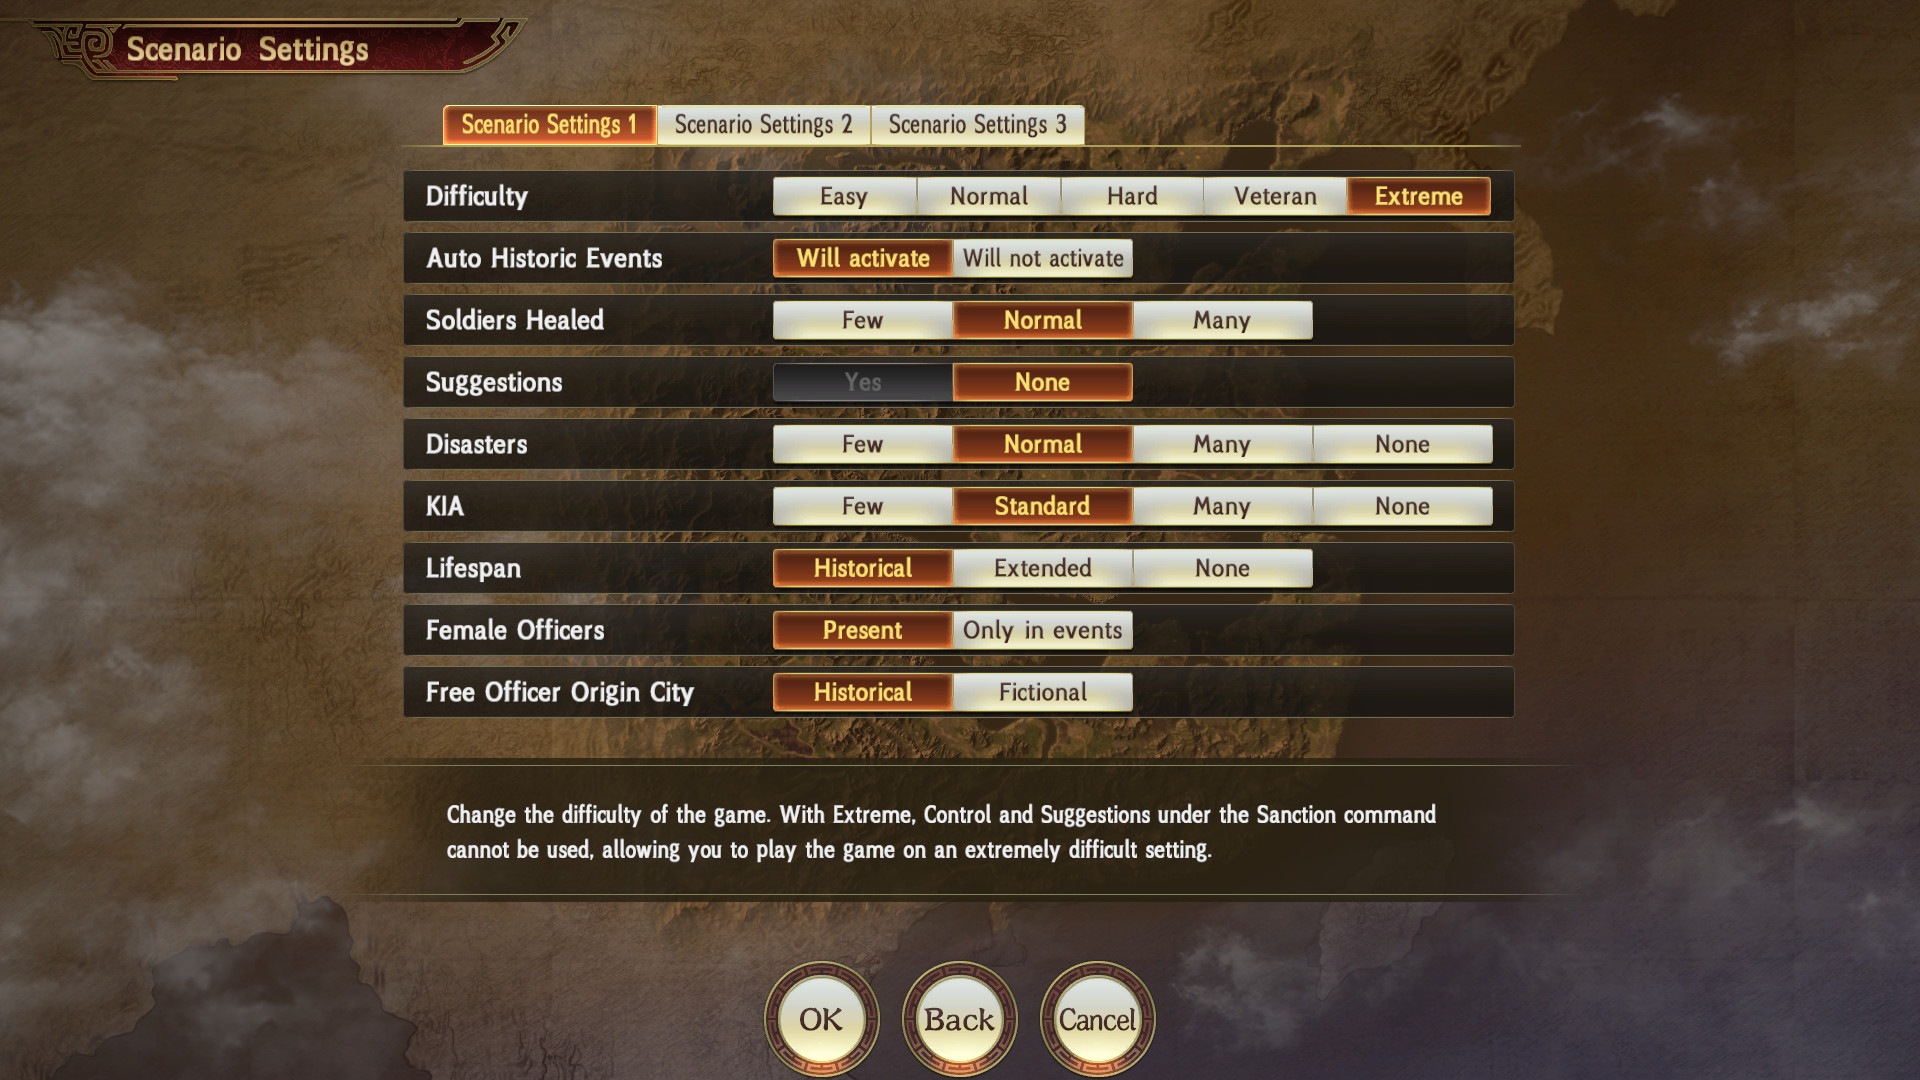 RTK14: [Extreme] Difficulty & Scenario Settings Set Featured Screenshot #1